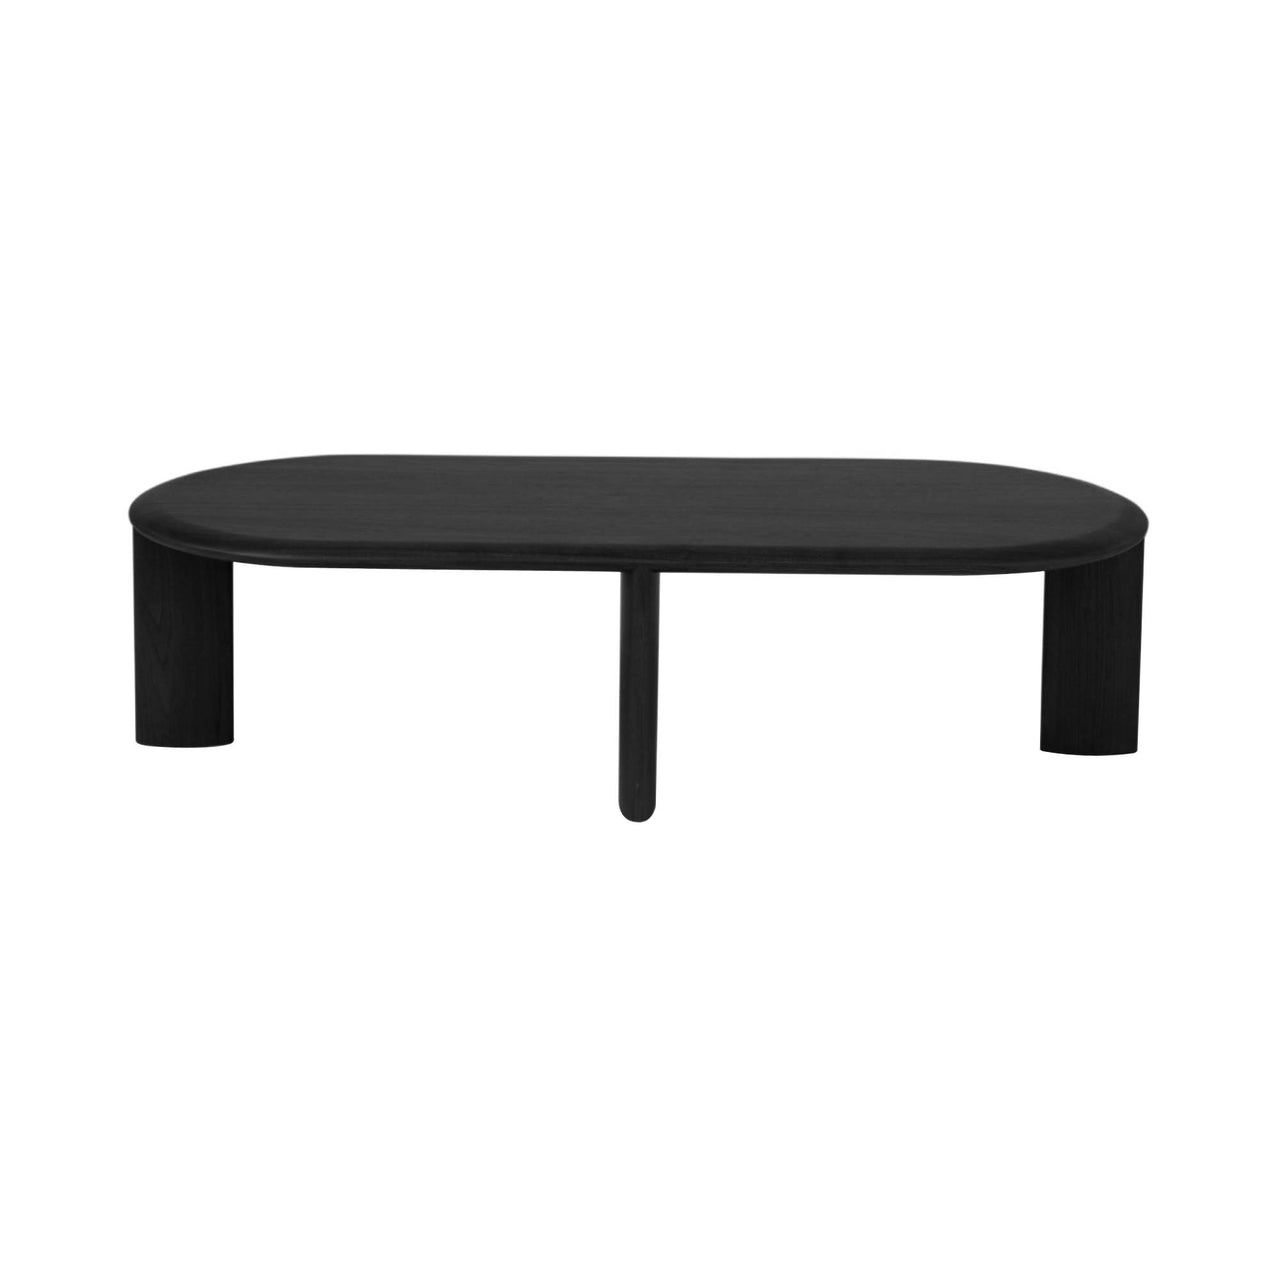 IO Coffee Table: Long + Stained Black